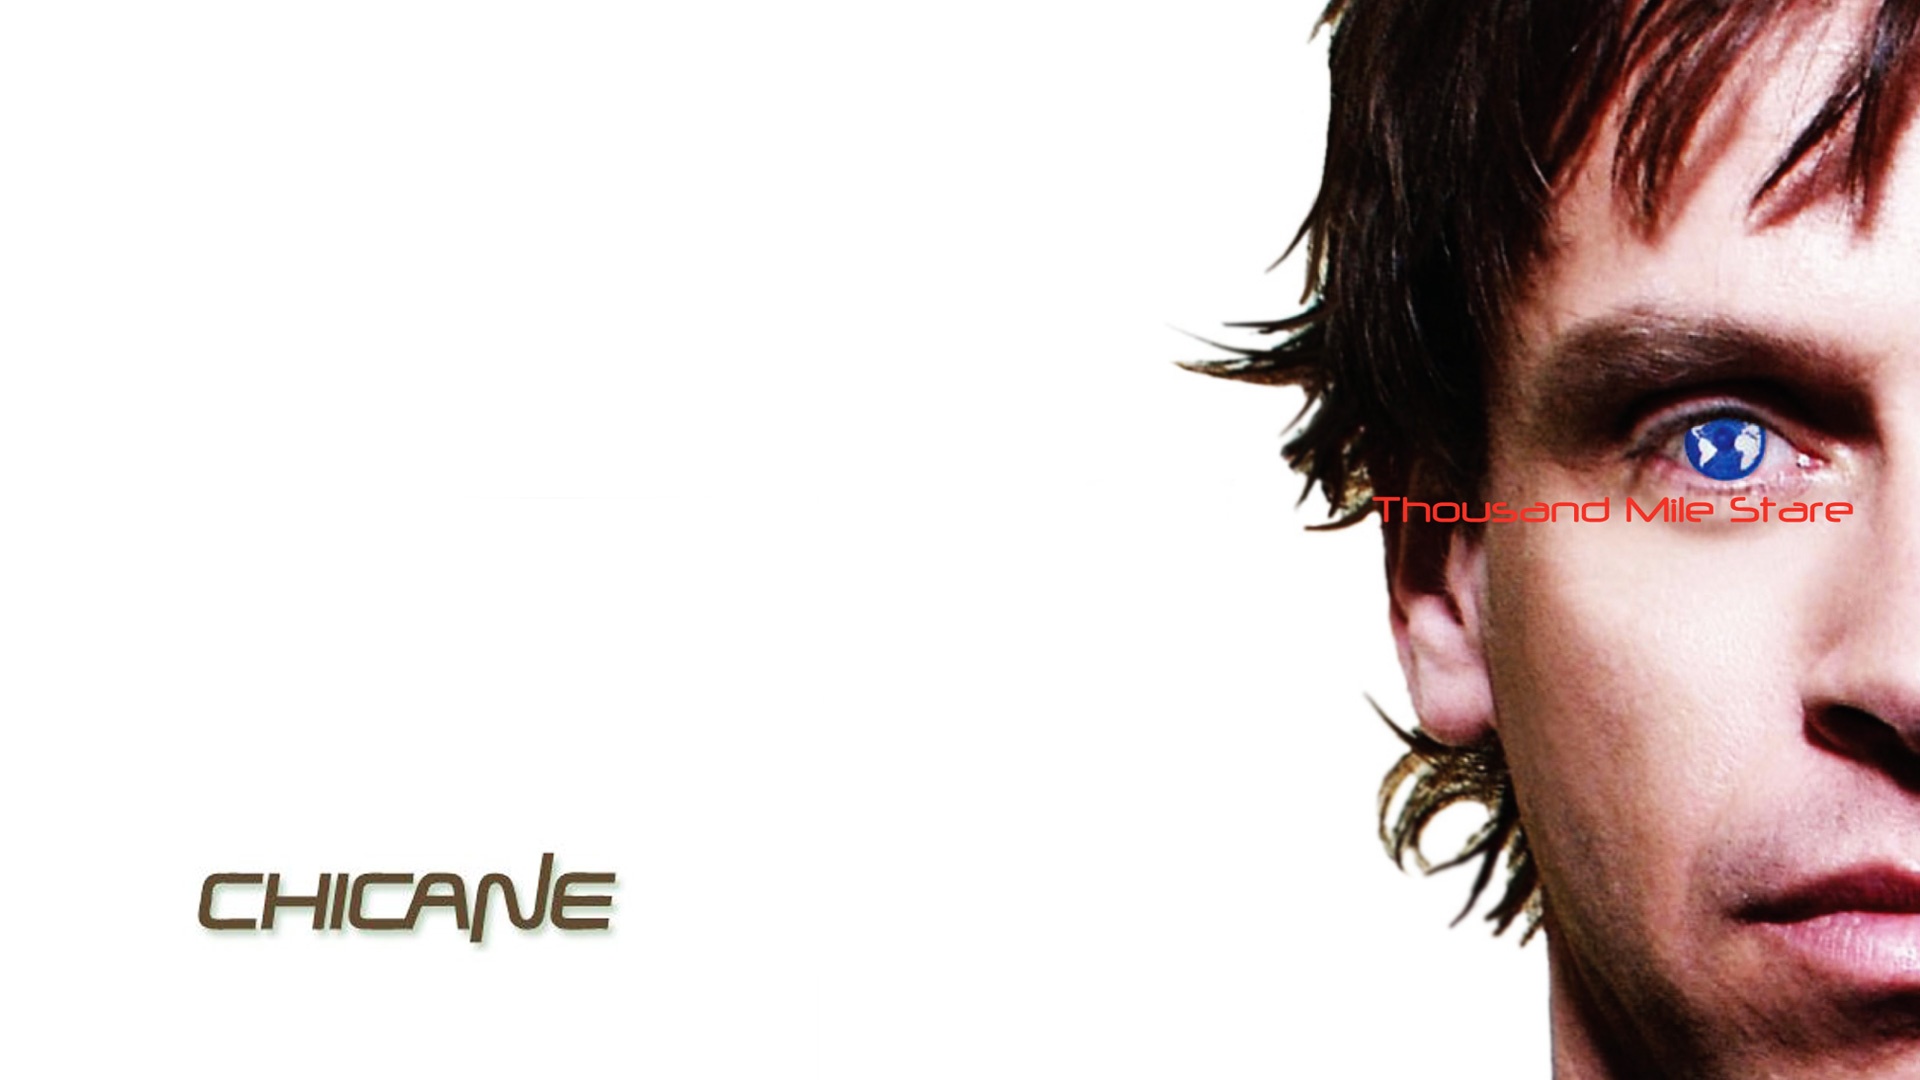 Chicane-Thousand Mile Stare HD and Wide Wallpapers